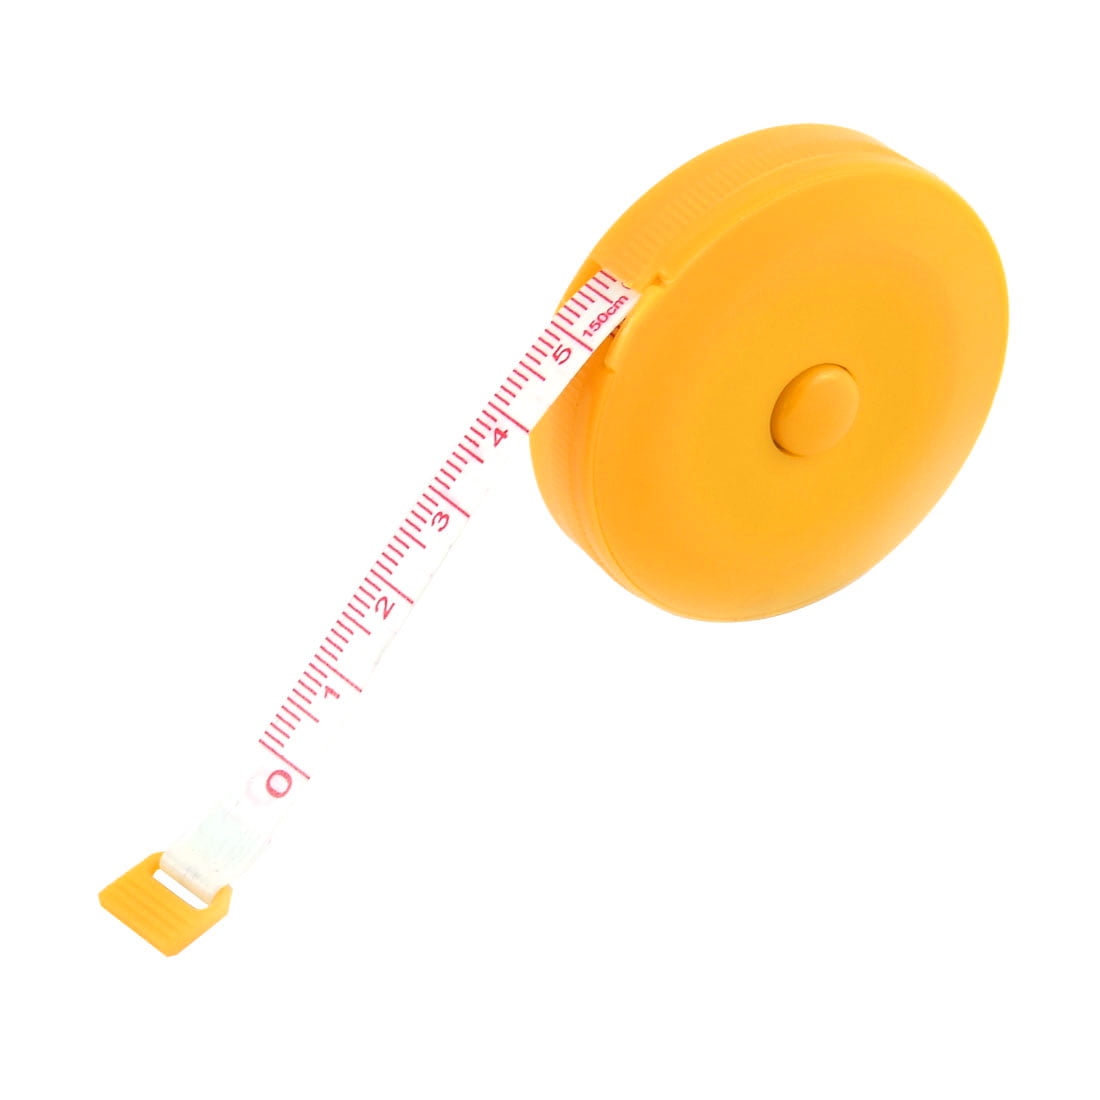 12 Pack: 60 Retractable Tape Measure by Loops & Threads